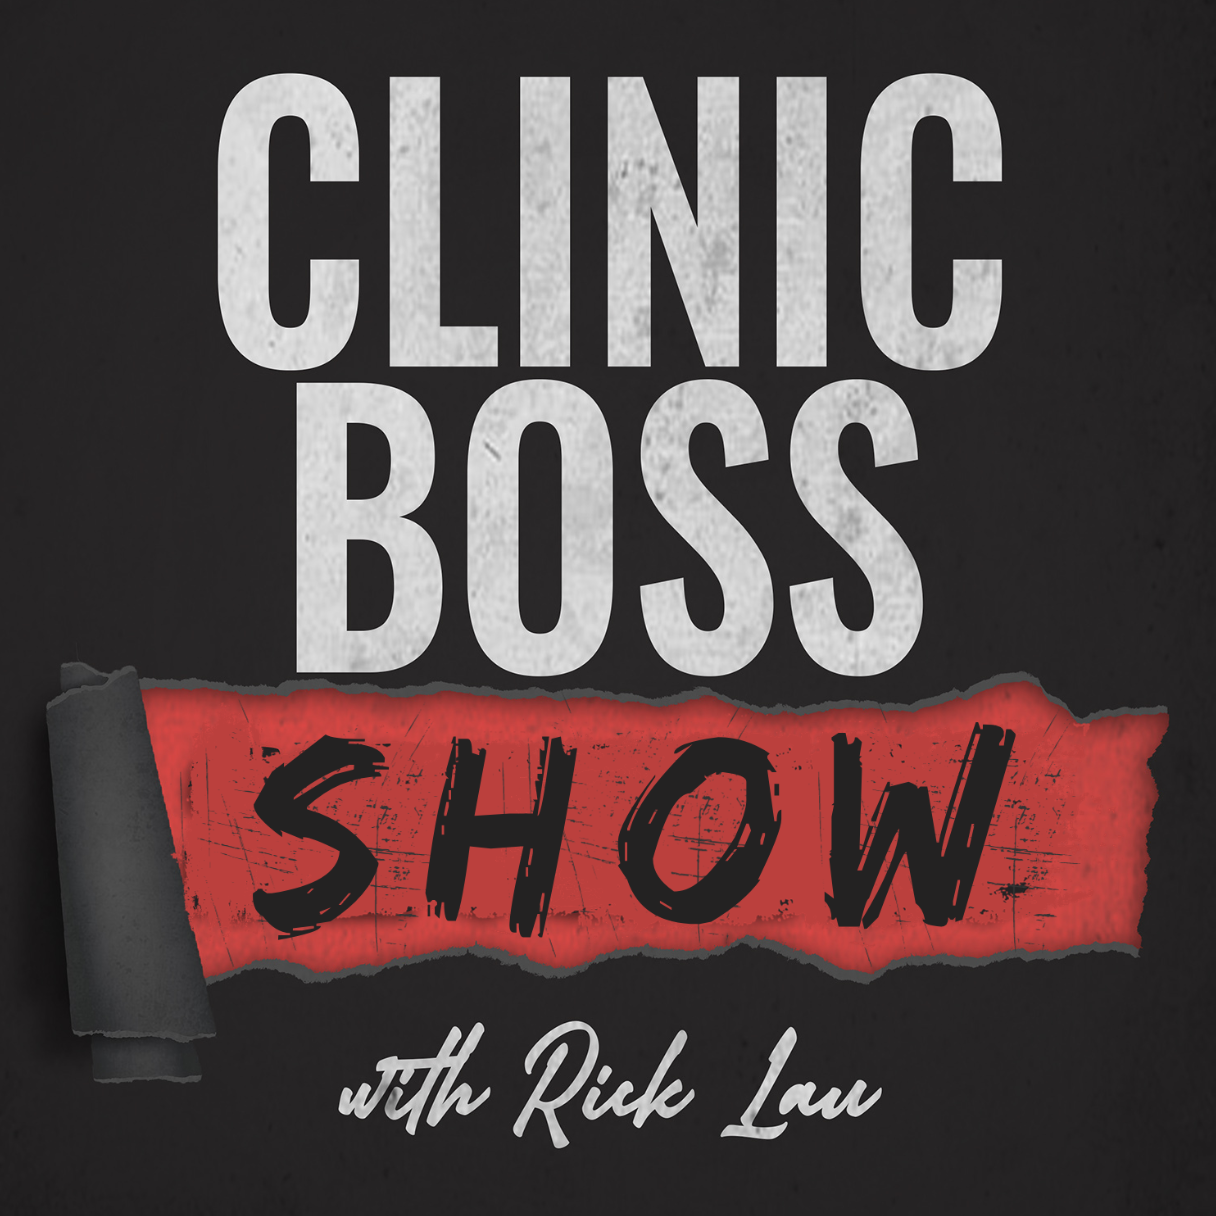 The Clinic Boss Show